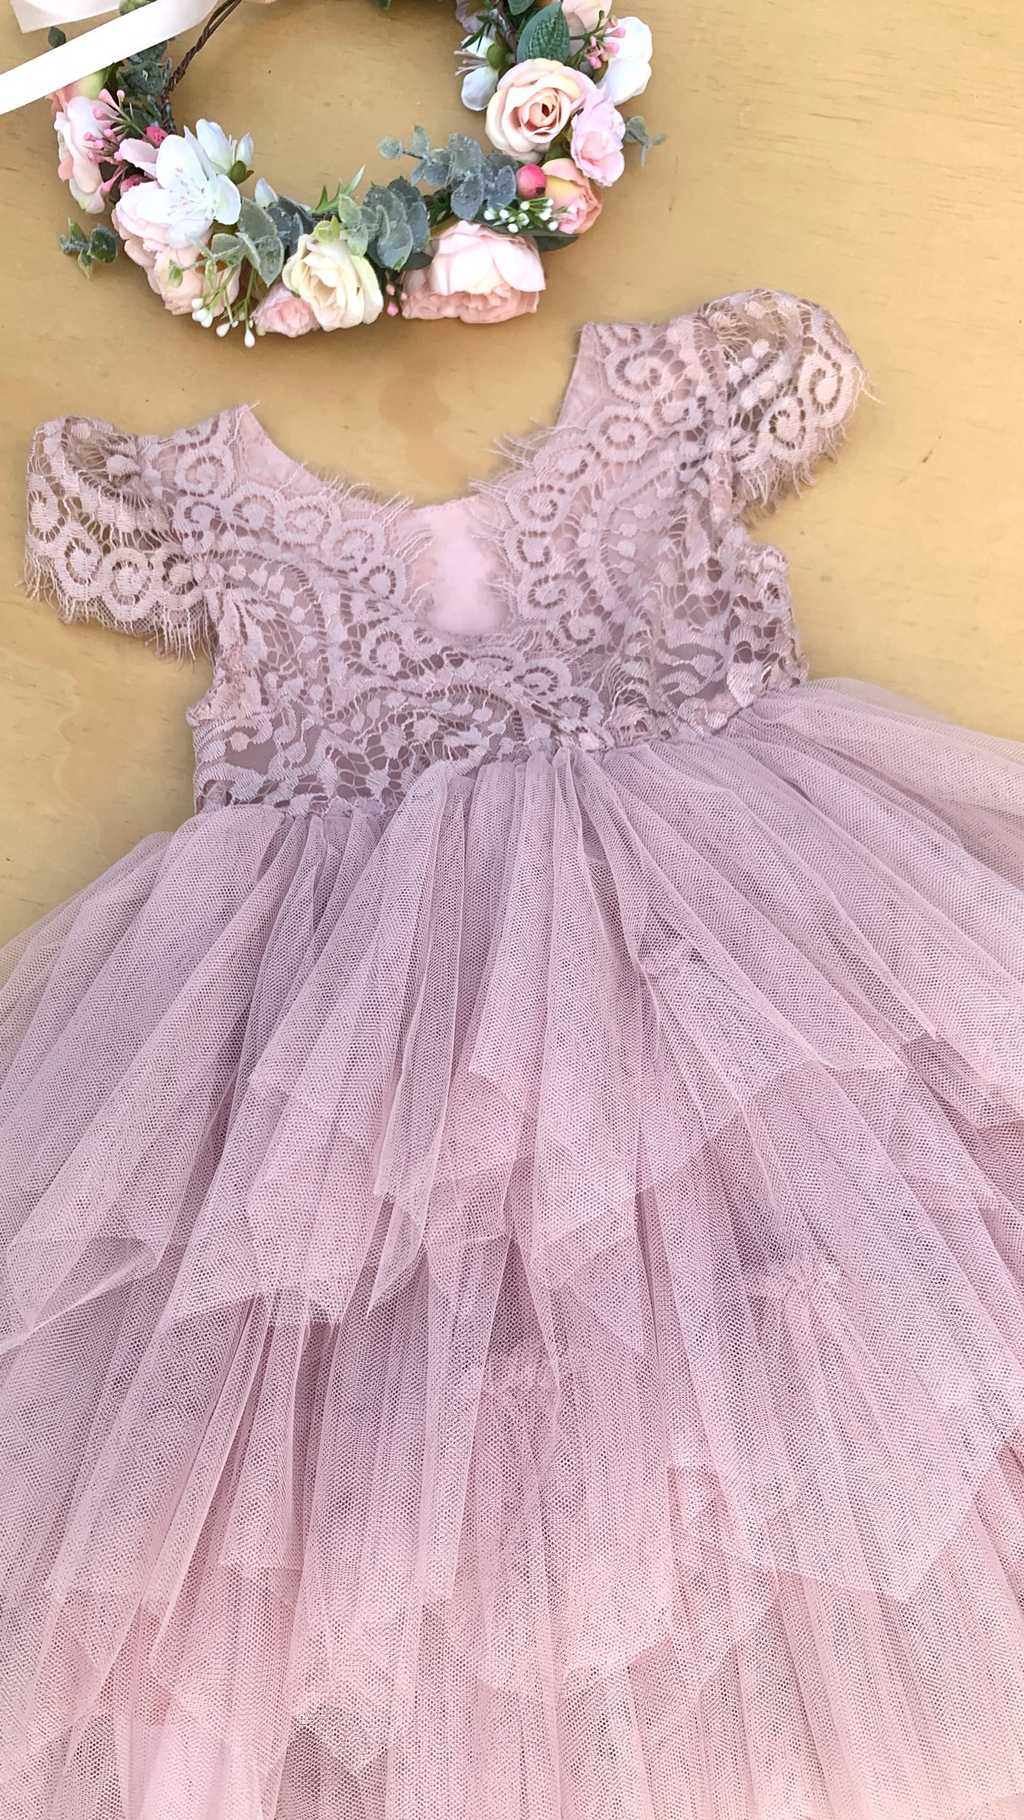 Felicity Capped Sleeve Dusty Pink Girls Dress - All Products